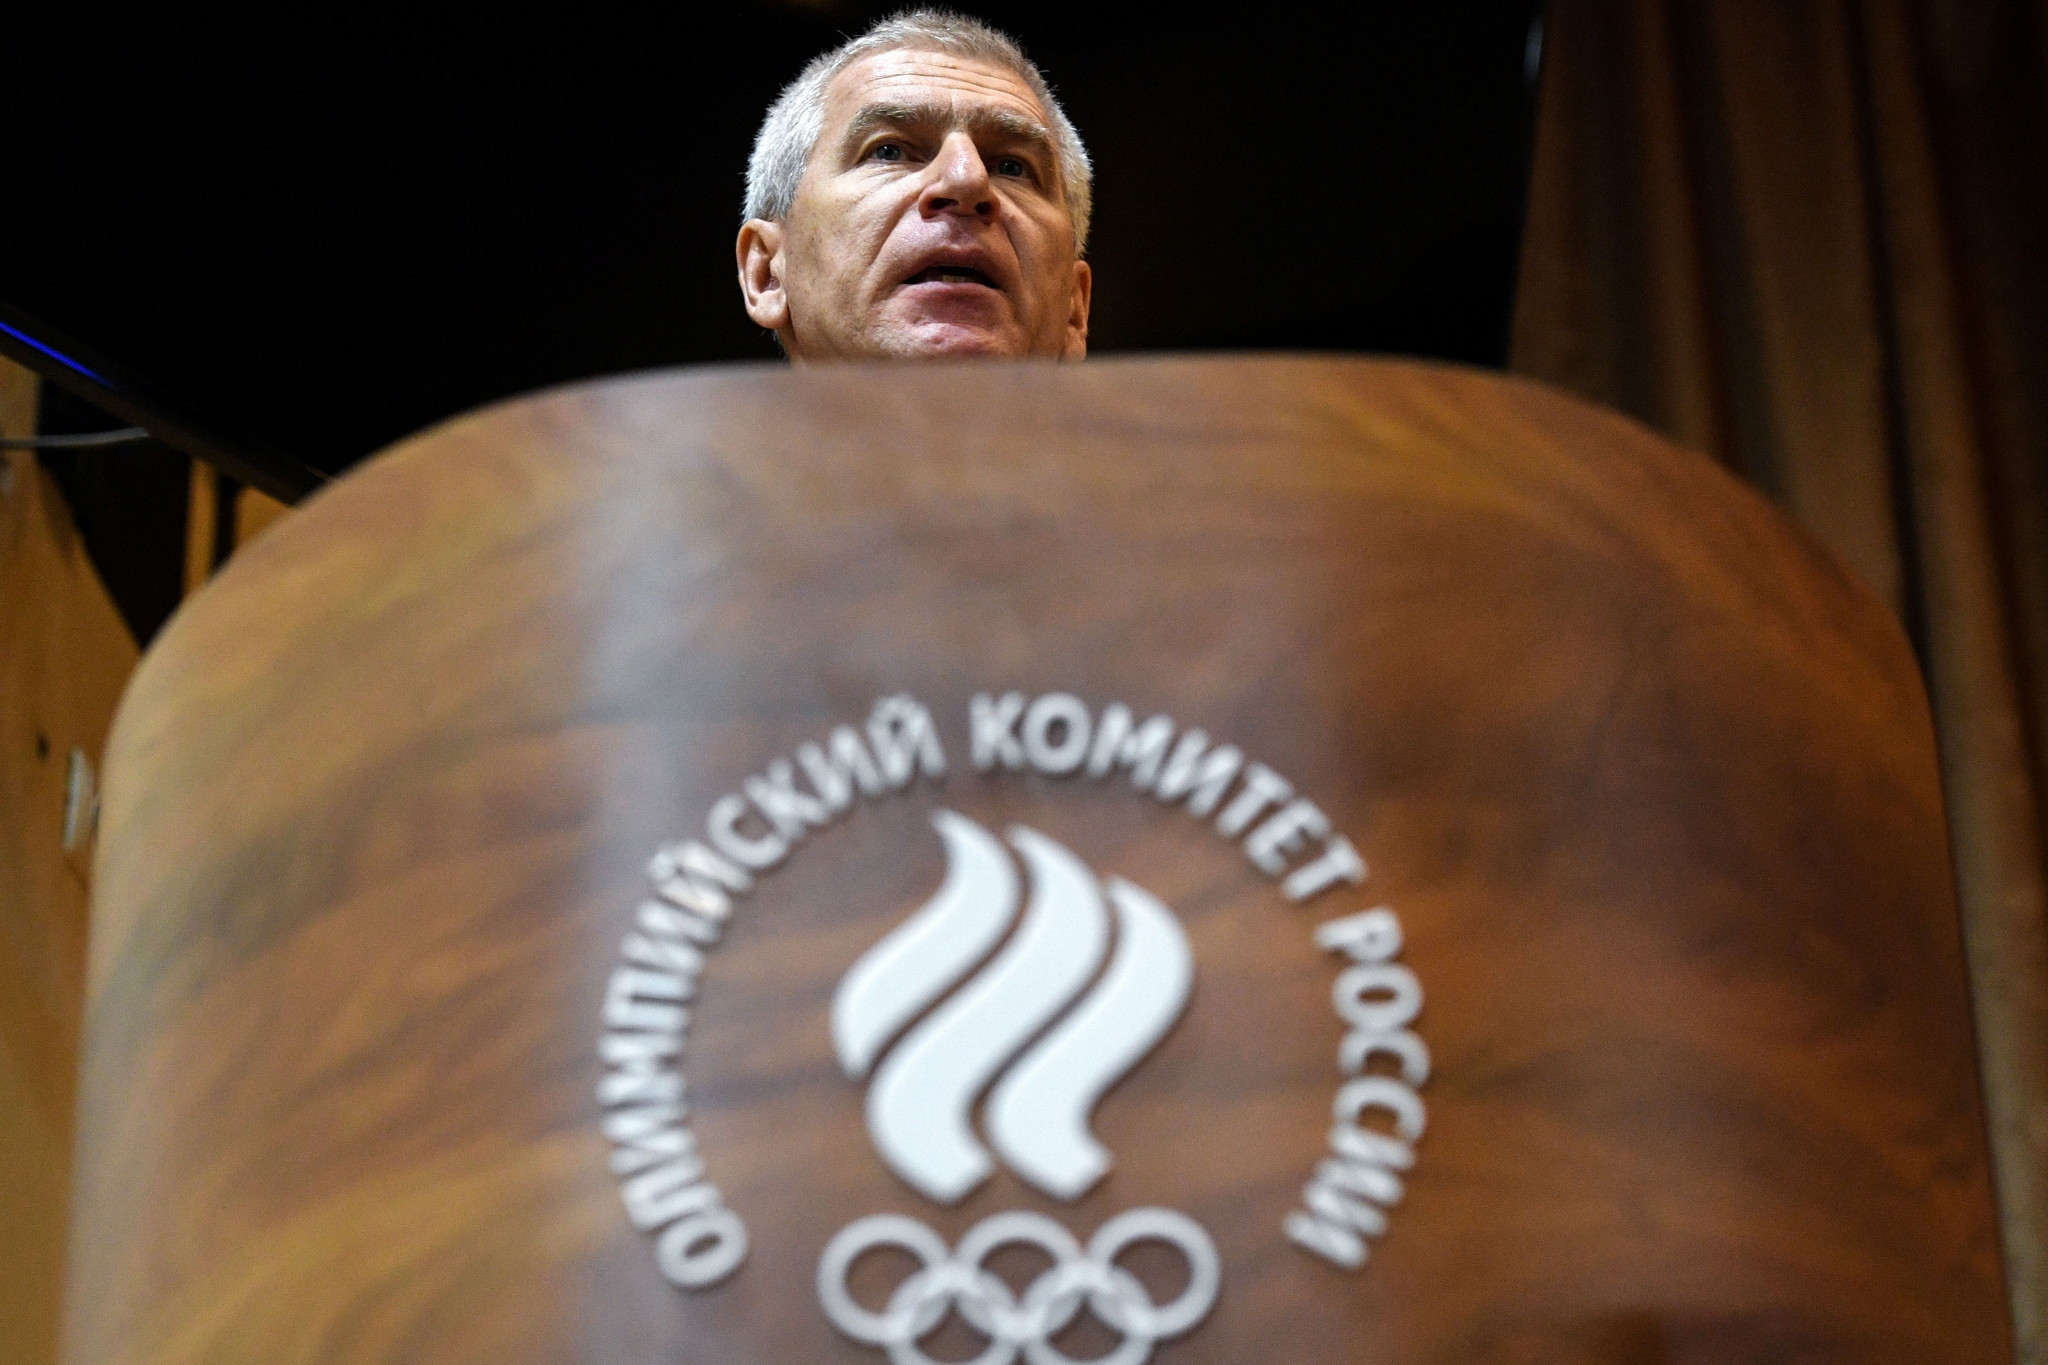 Russian Sports Minister says nation must keep in contact with international sports federations